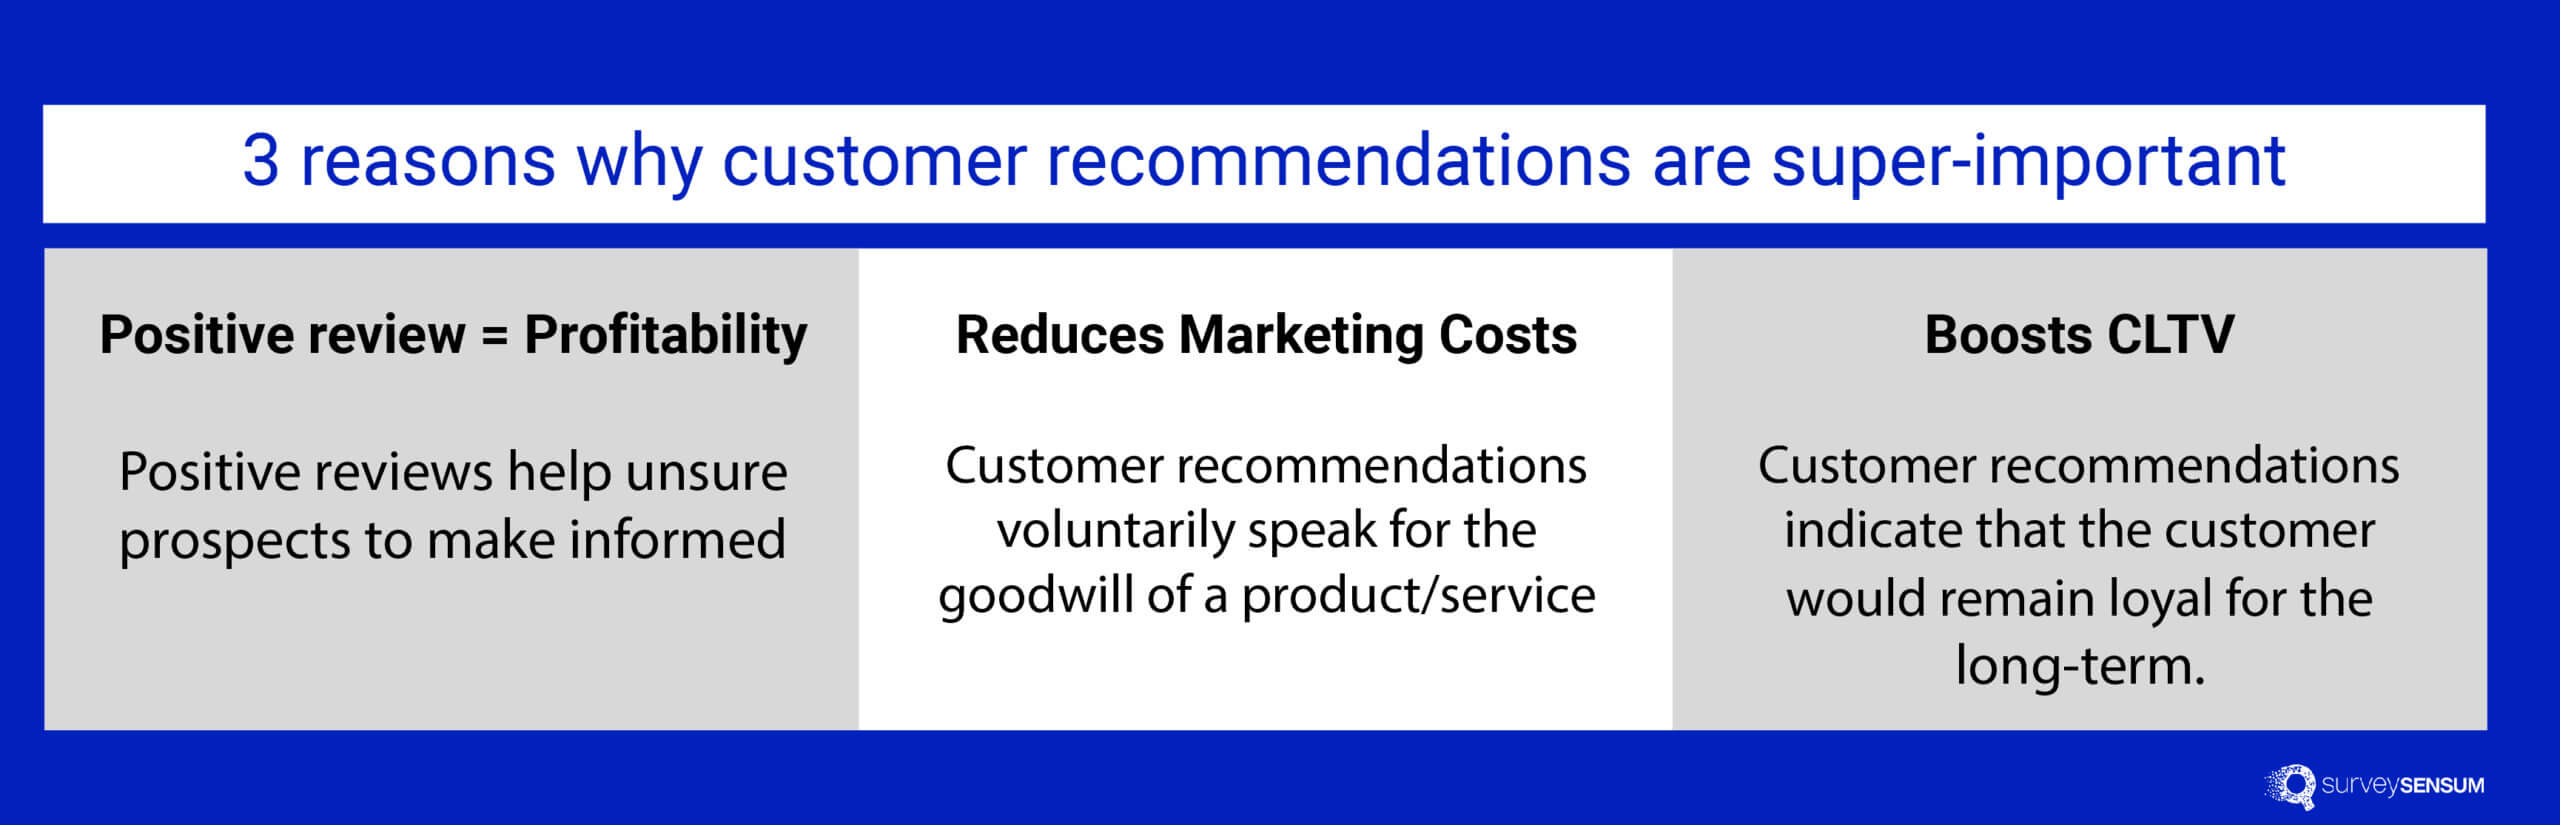 Importance of customer recommendation